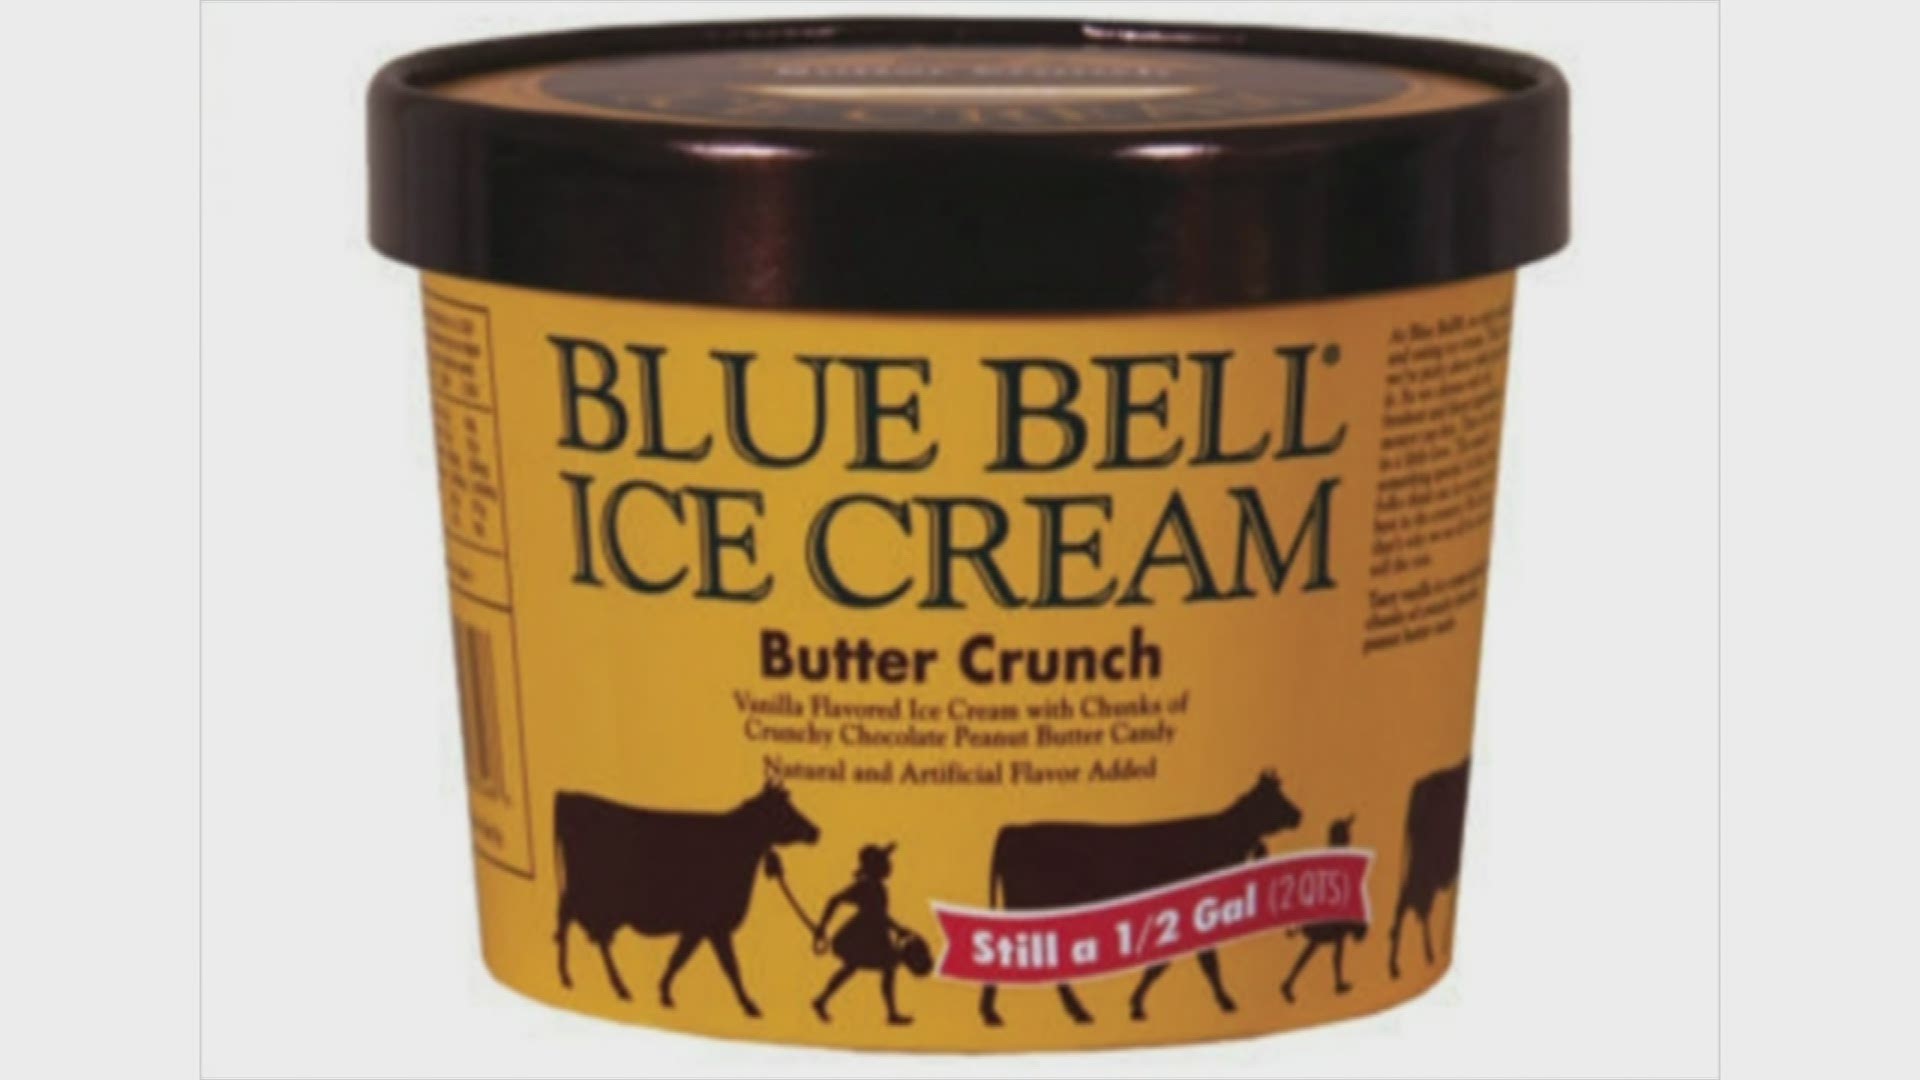 Blue Bell Ice Cream has issued a recall for butter crunch ice cream products because they may contain plastic.